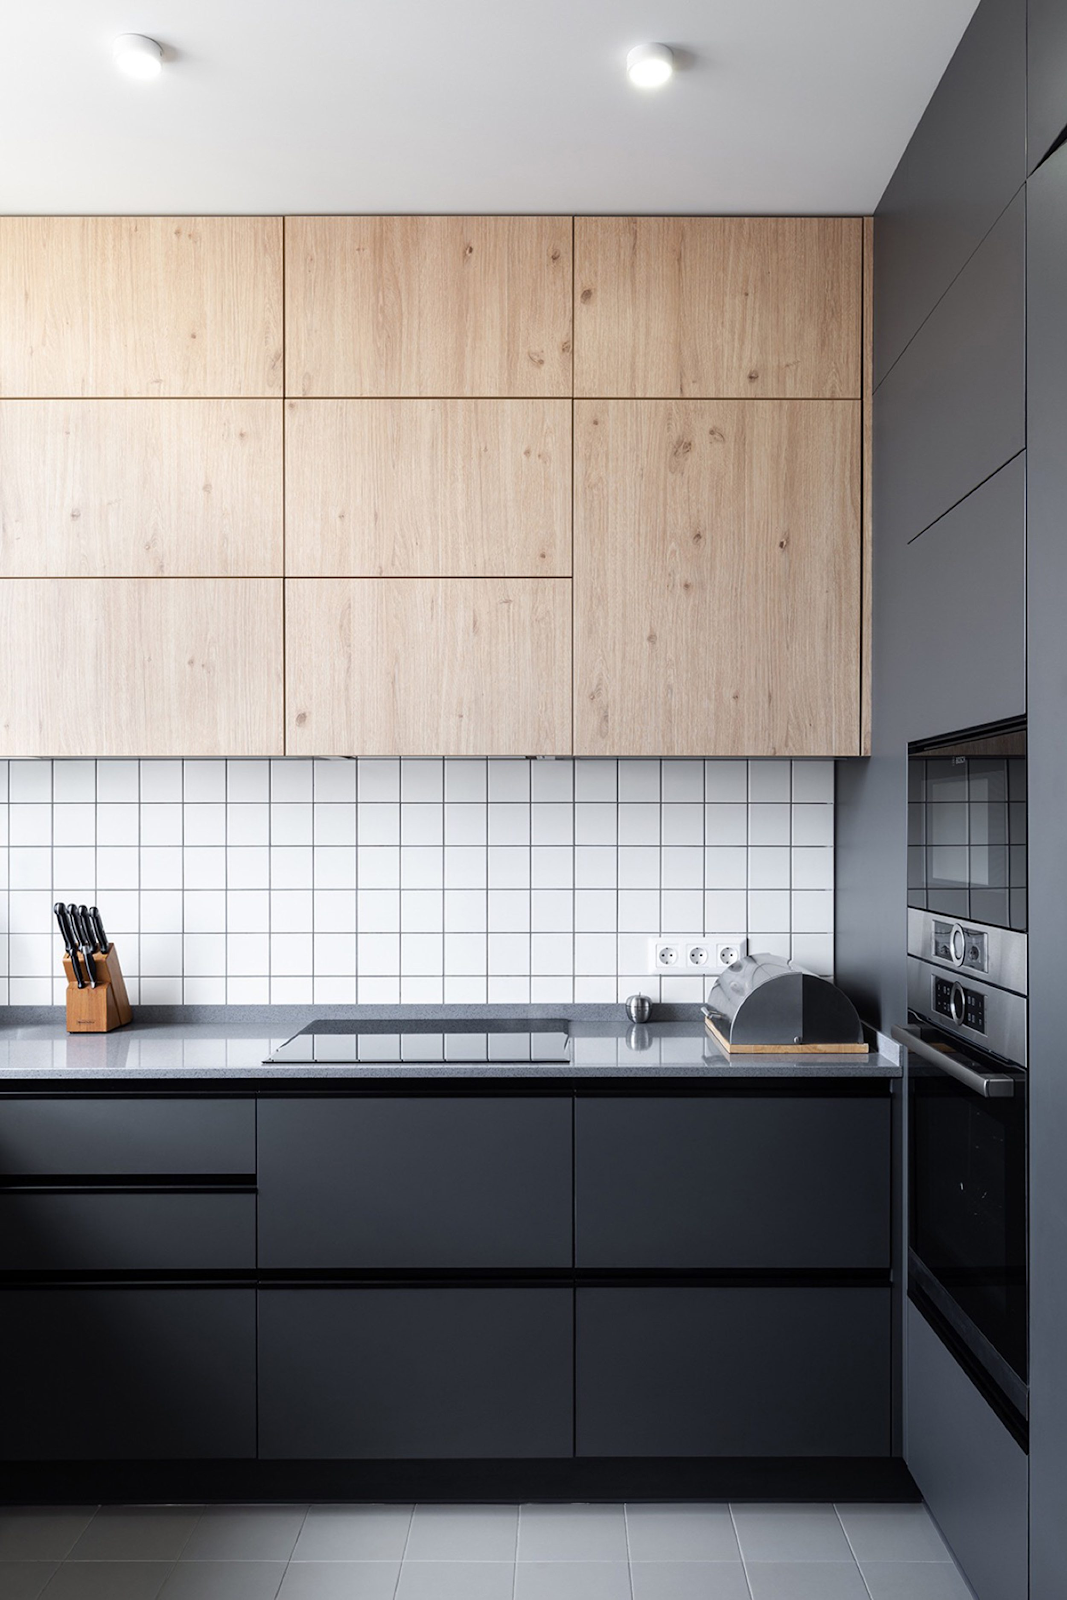 ultra modern kitchen with matte black and wood grain cabinets. clean lines and neutral colors make this kitchen feel calming and clean. the cabinets reach the ceiling for extra storage space